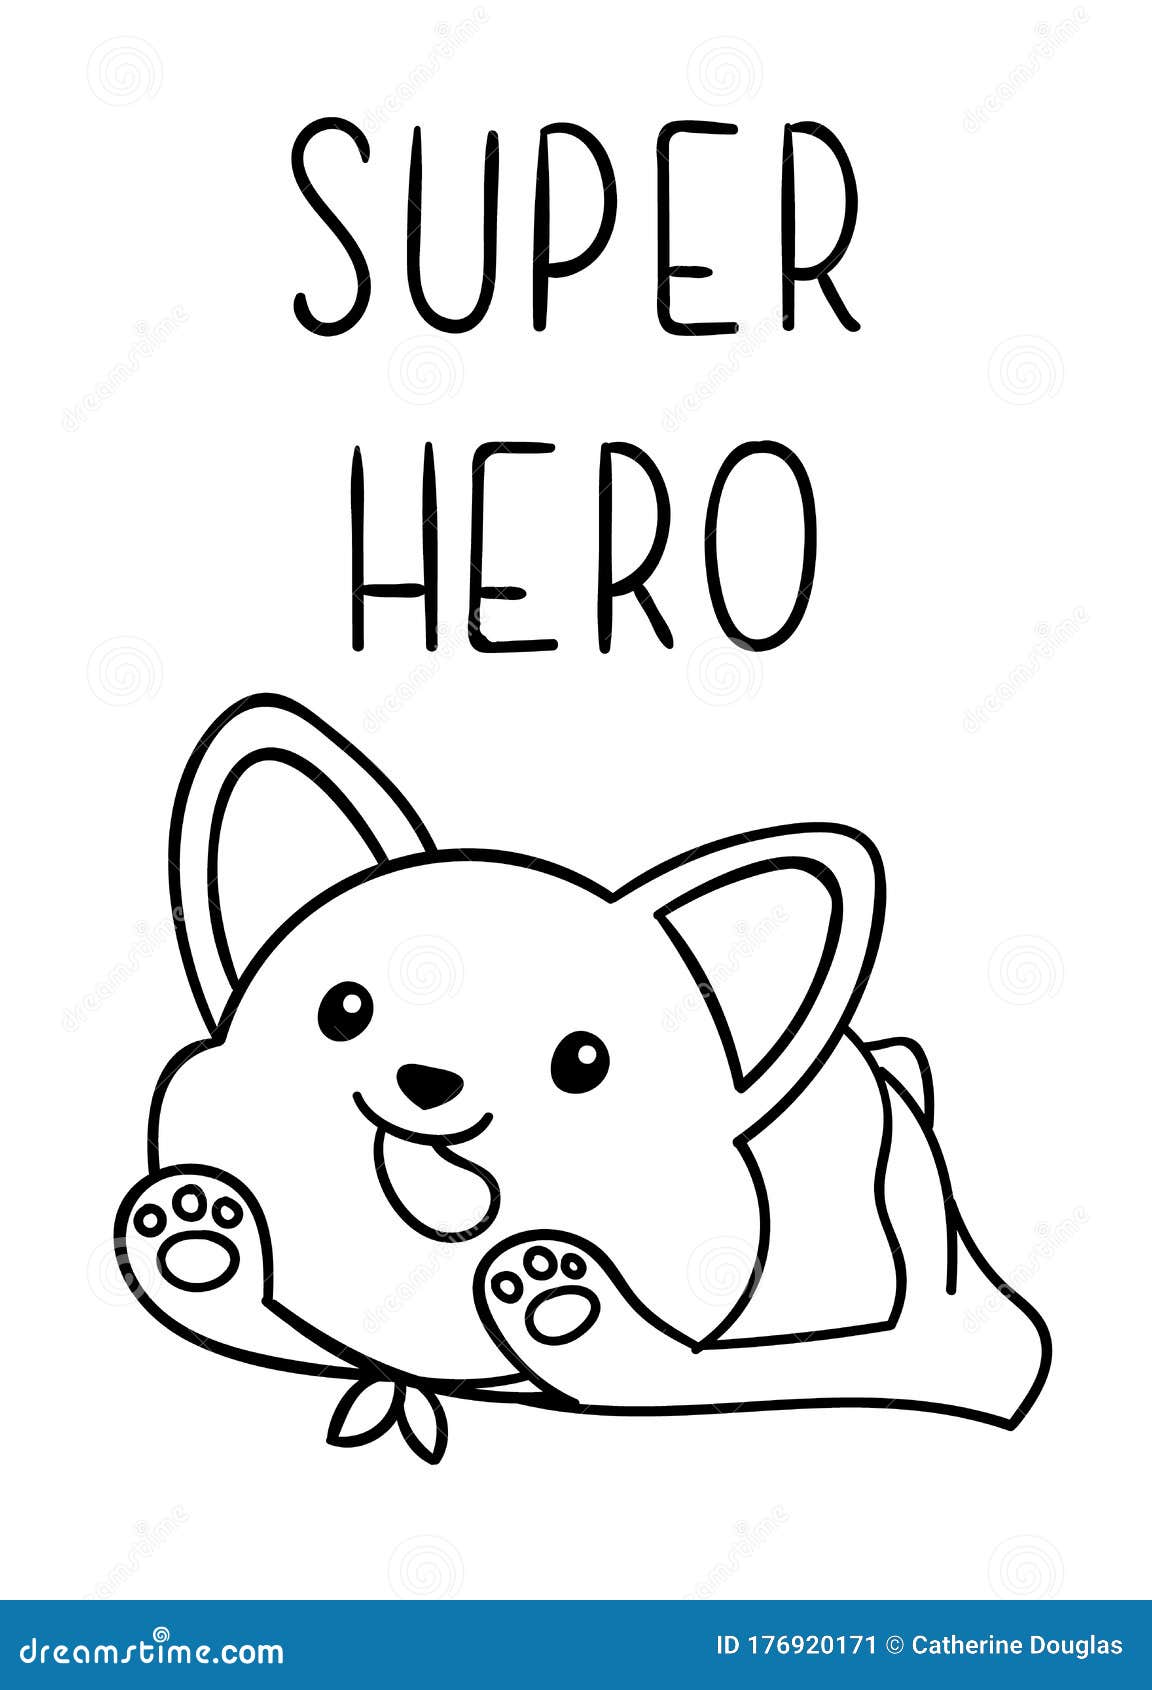 Coloring pages black and white cute kawaii hand drawn corgi dog doodles lettering super hero stock vector